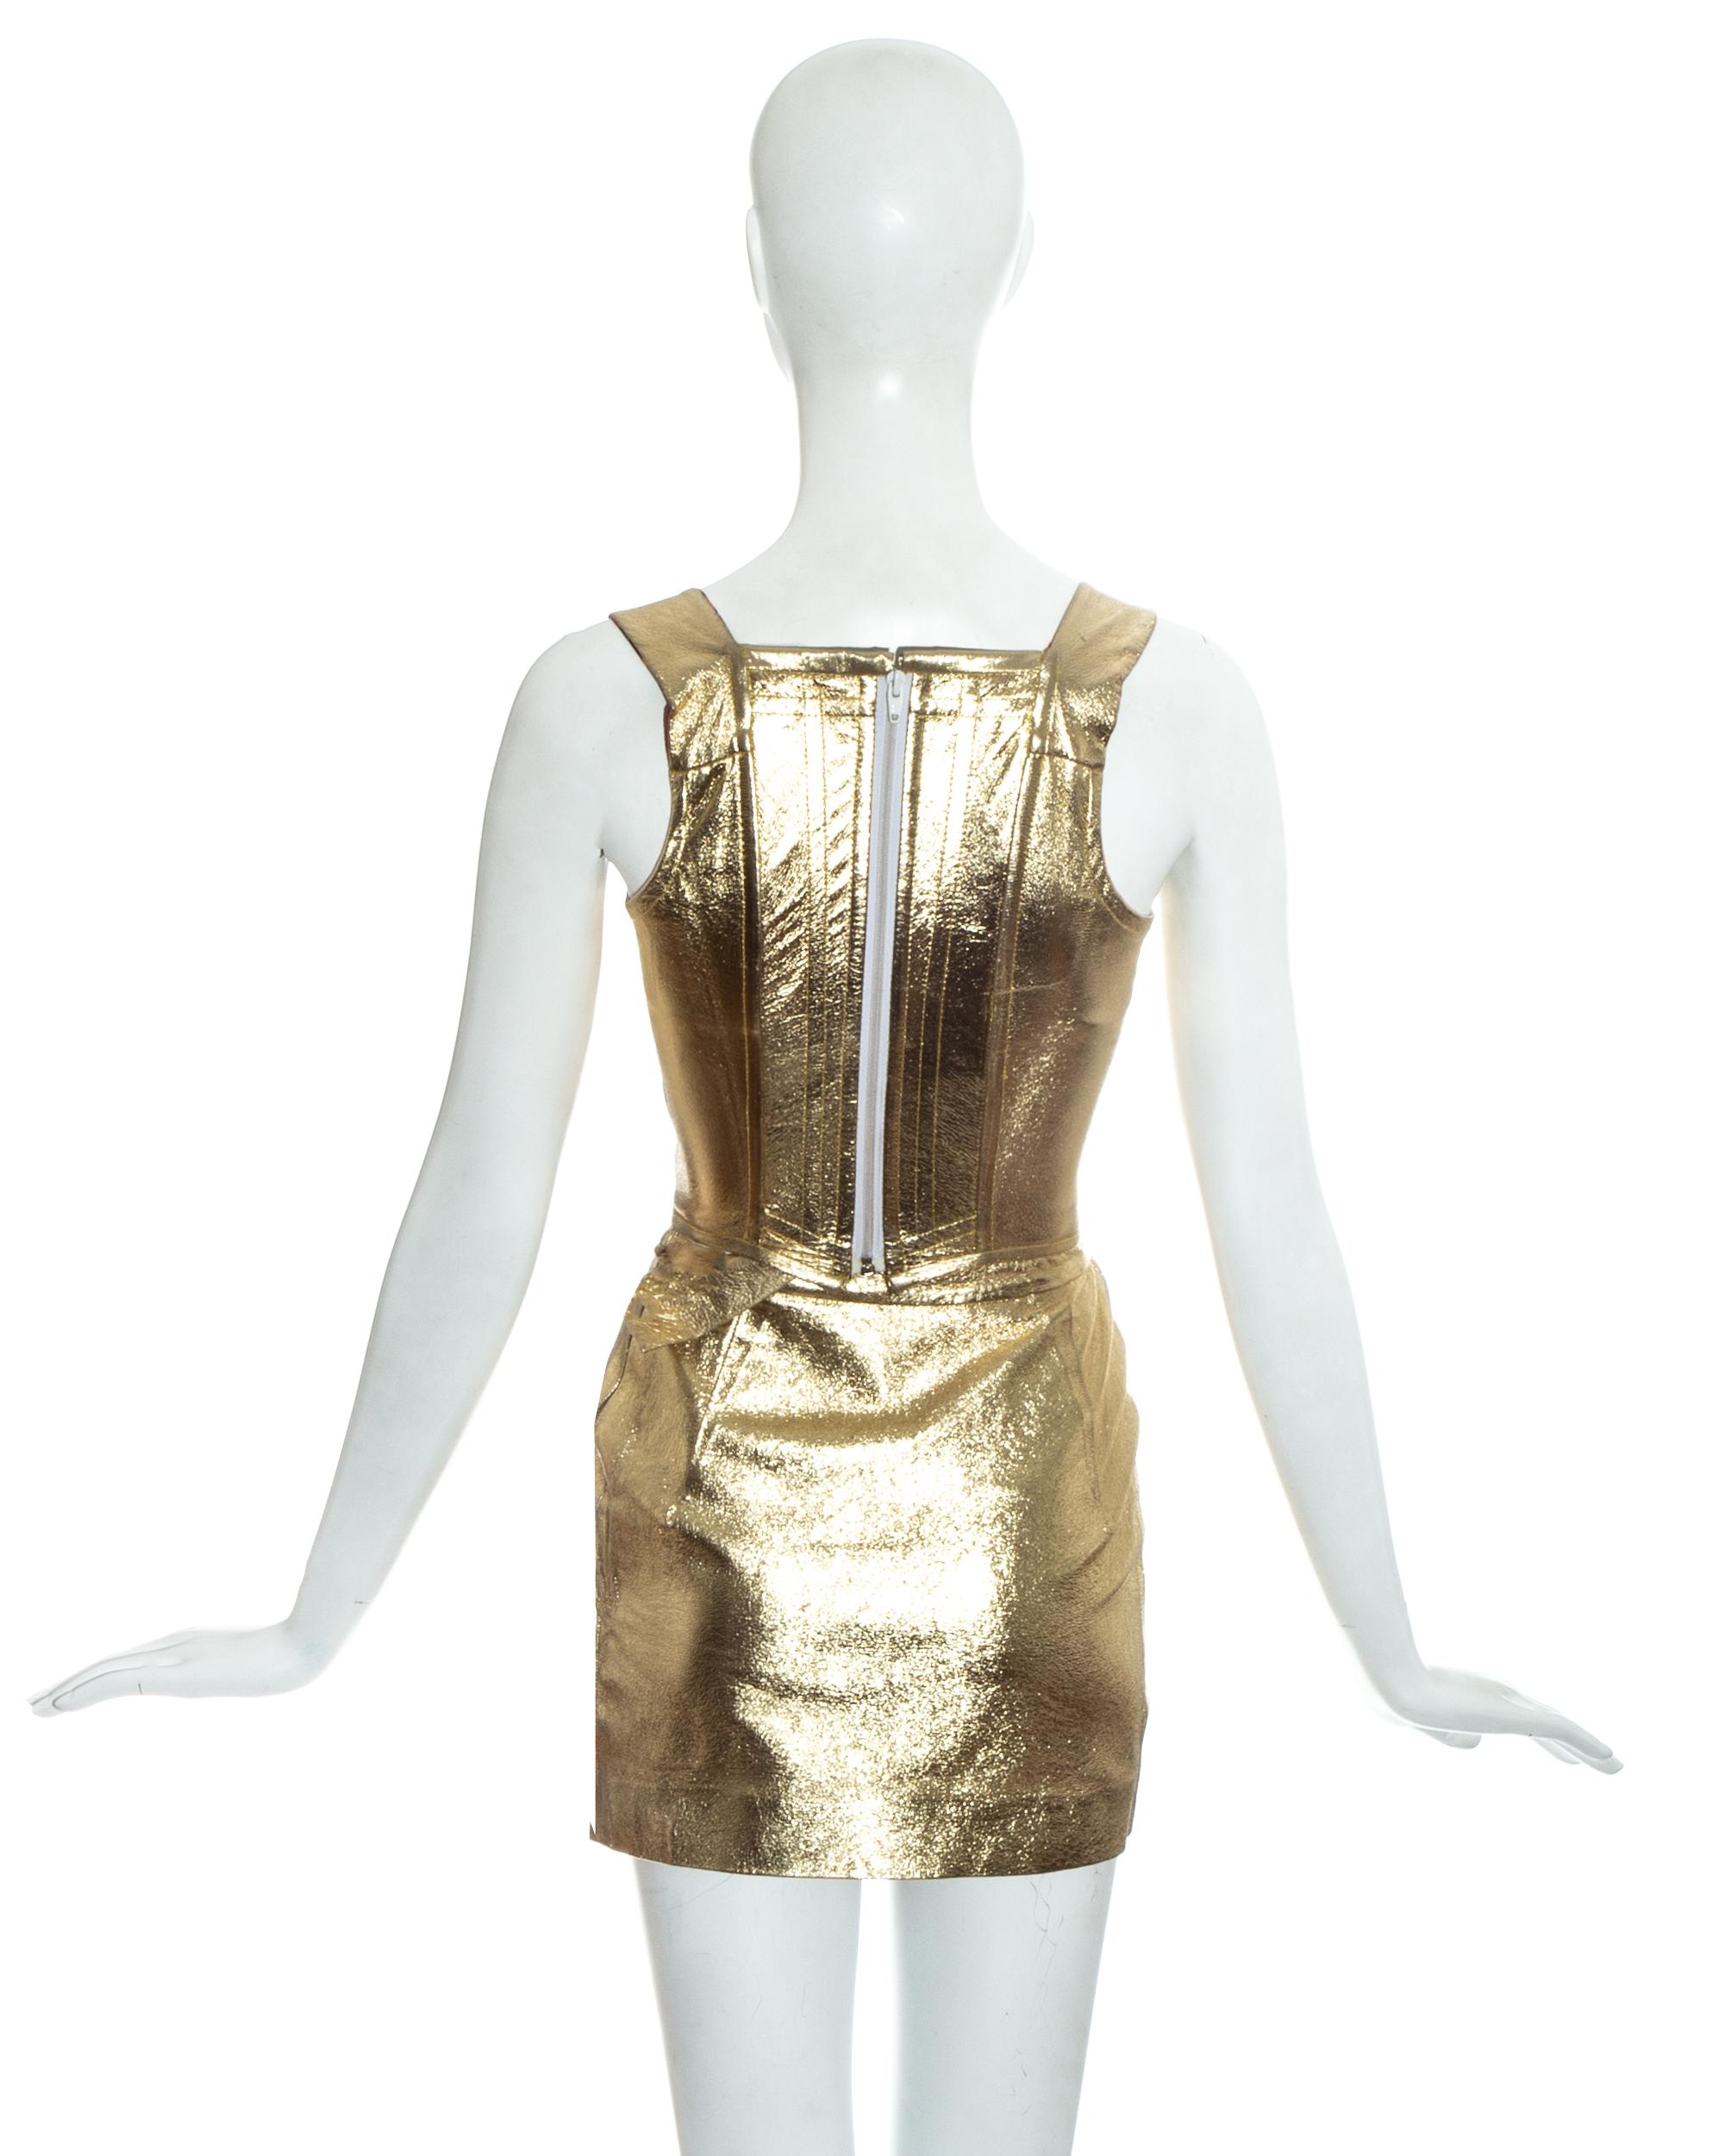 Women's Vivienne Westwood gold leather corset and mini skirt, 'Time Machine' ss 1988